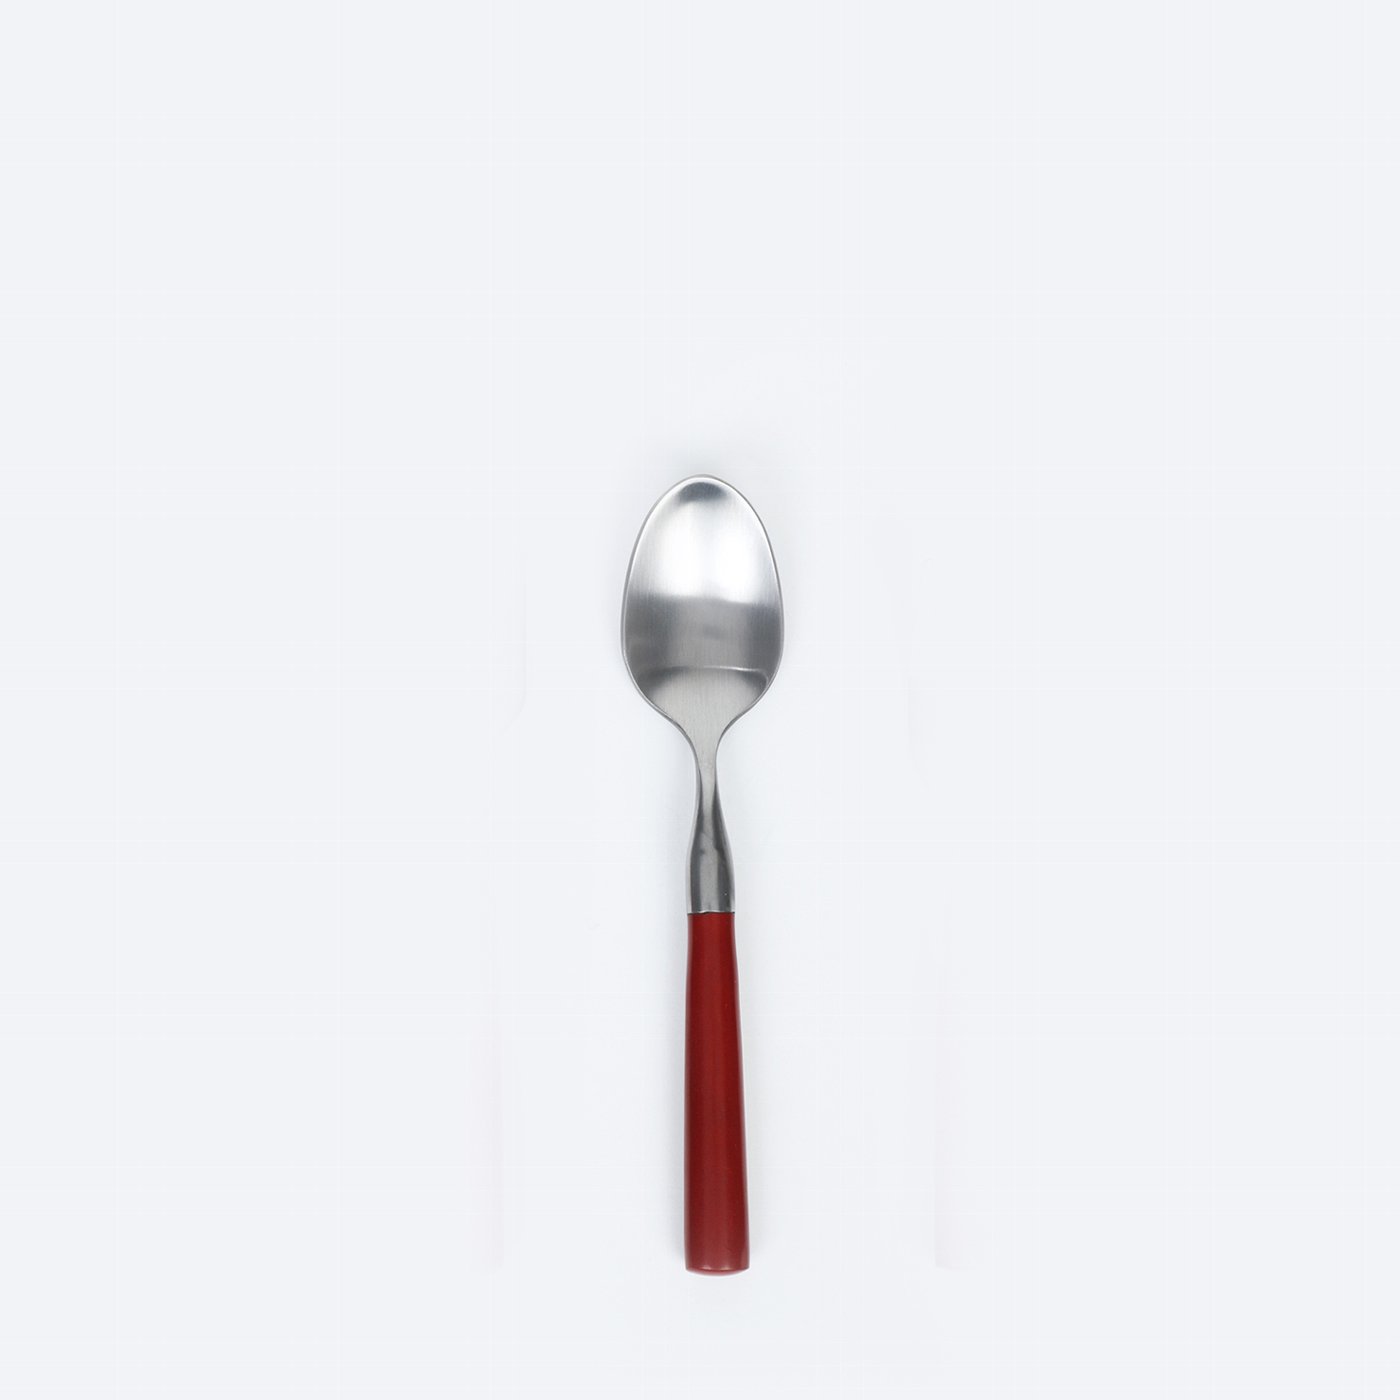 Daily tea-/ coffespoon stainless steel satined